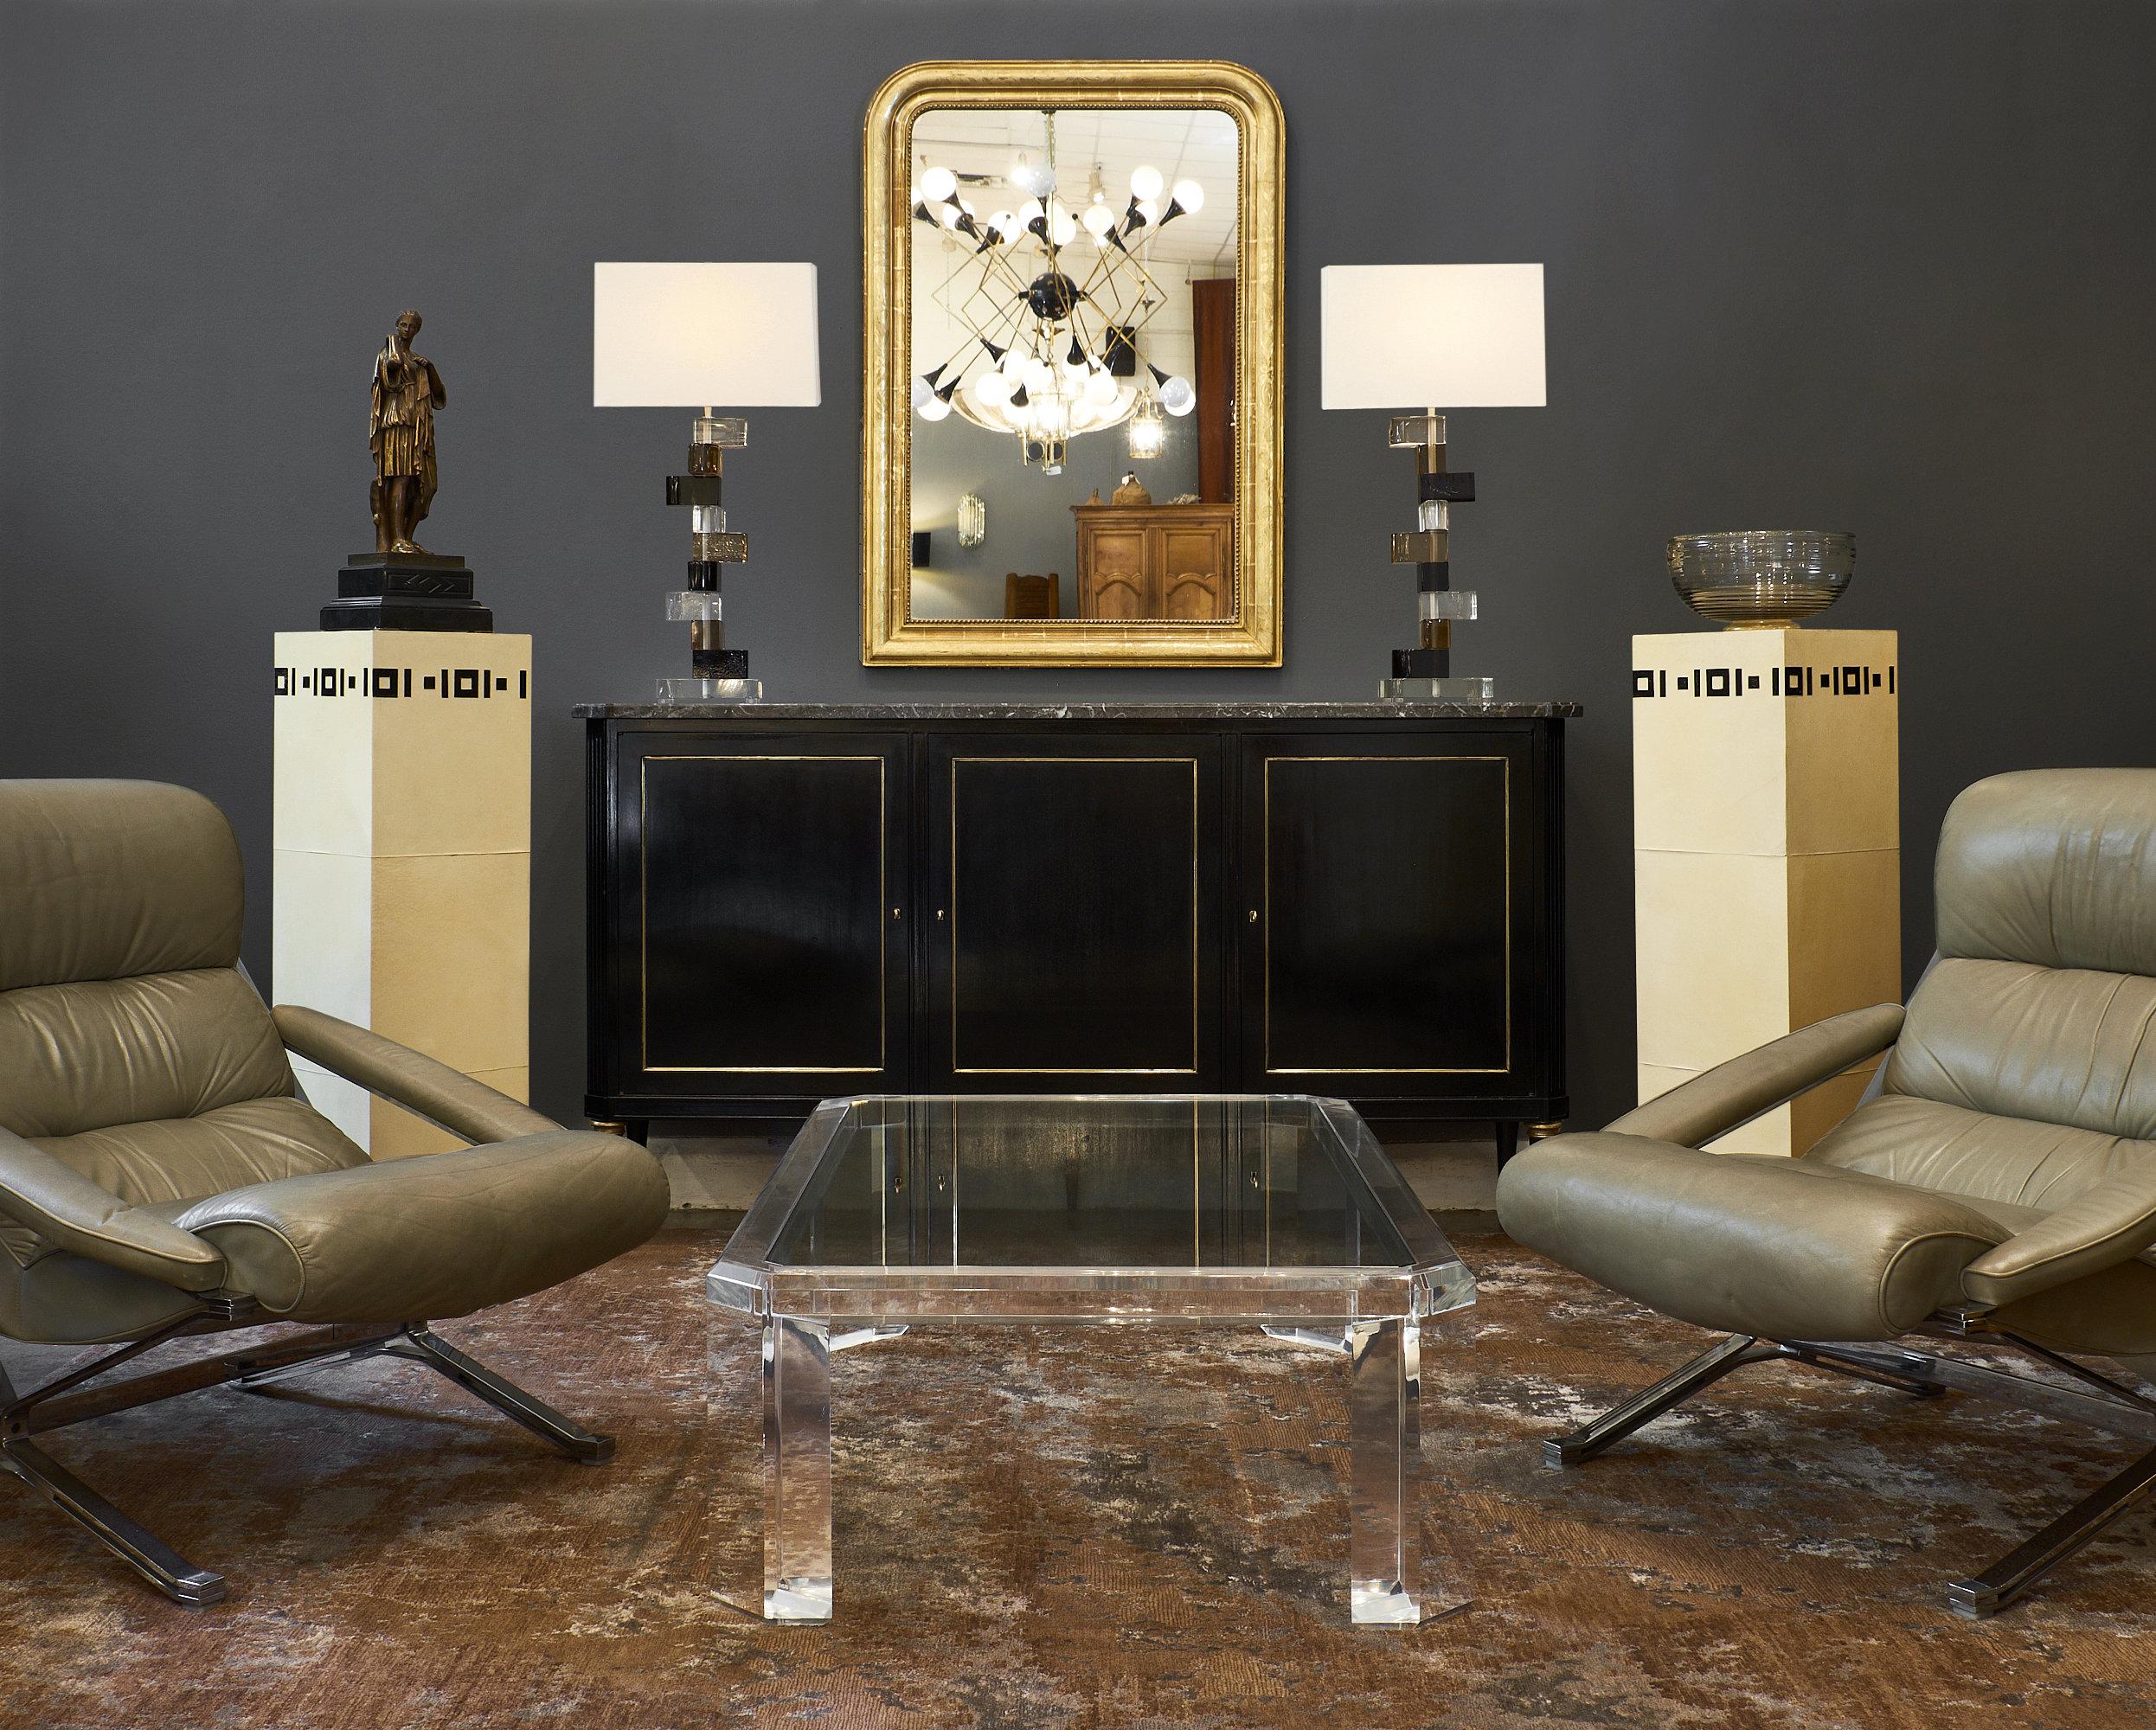 A French Lucite vintage coffee table. This Modernist piece is in excellent vintage condition, with a Lucite structure and glass top. We love the strong proportions and modern forms!